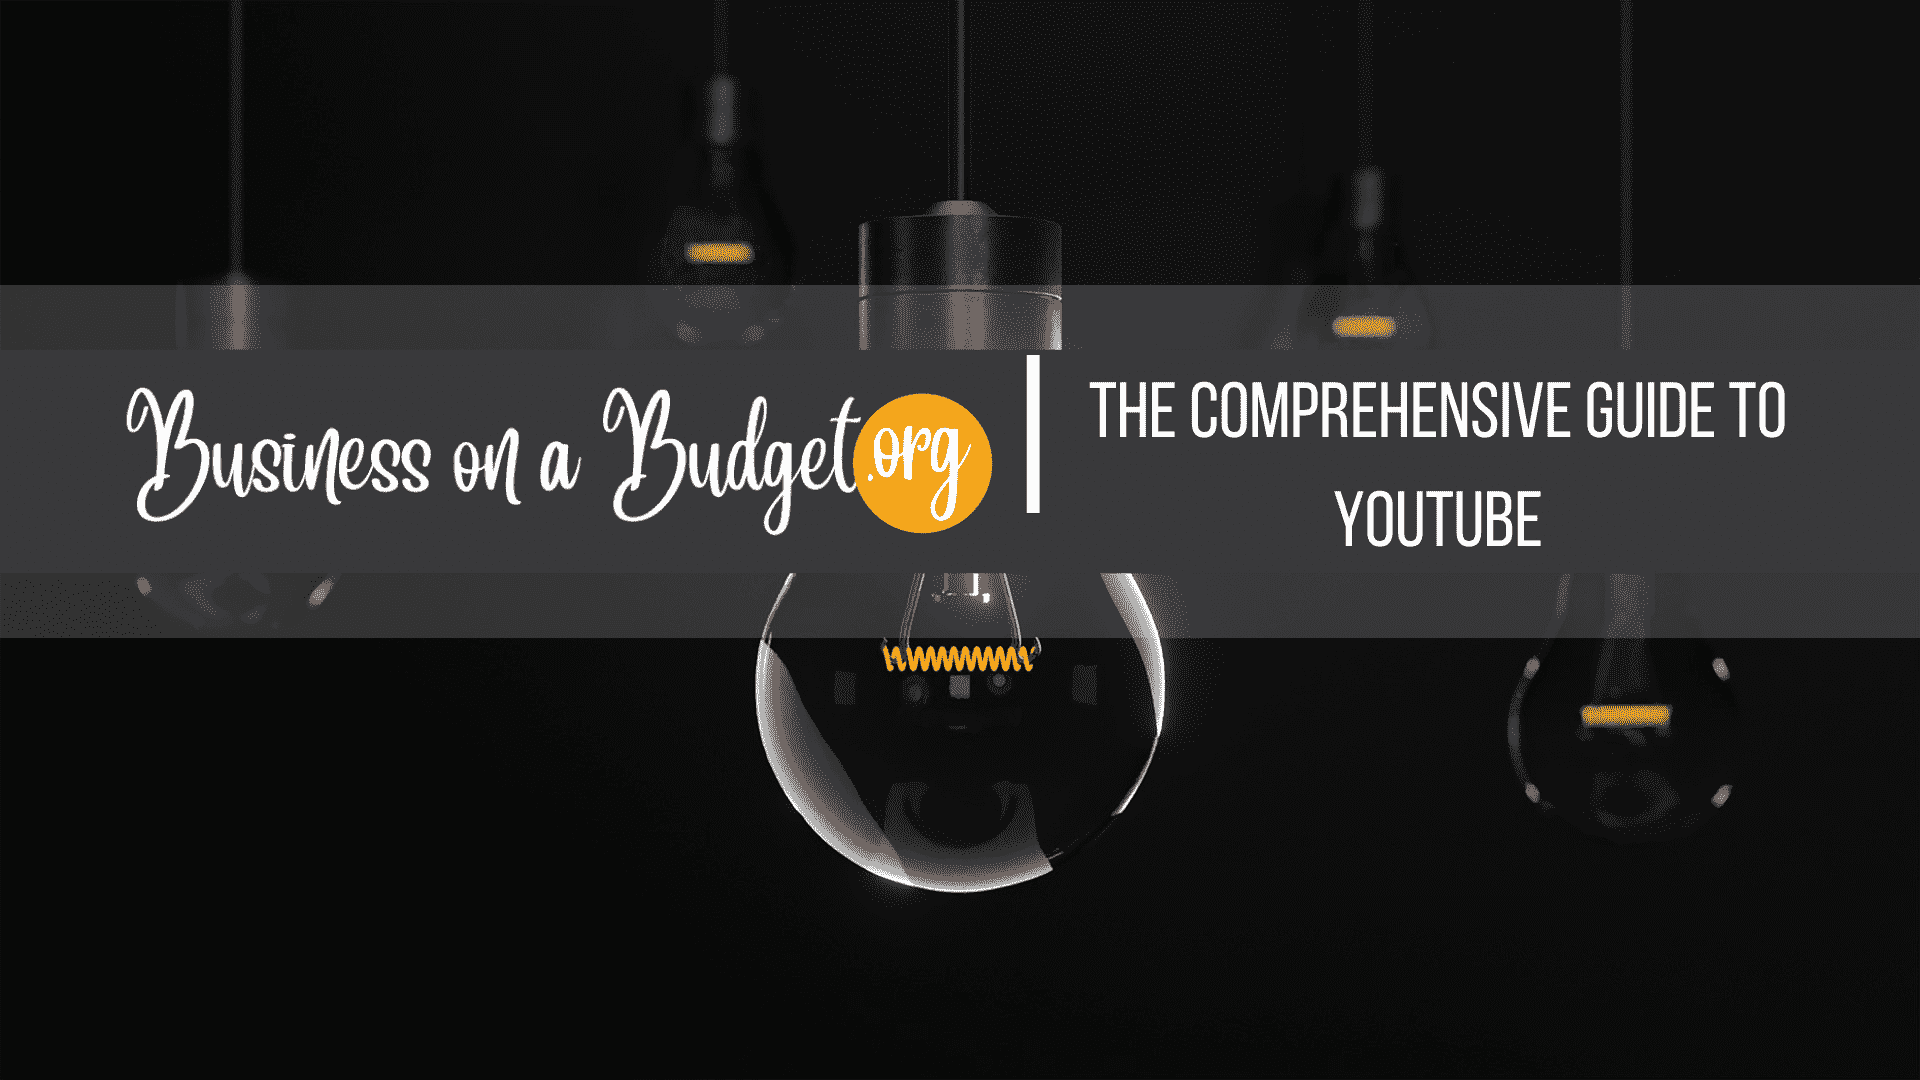 The Comprehensive YouTube Course: How to Start, Grow, and Monetize Your Channel